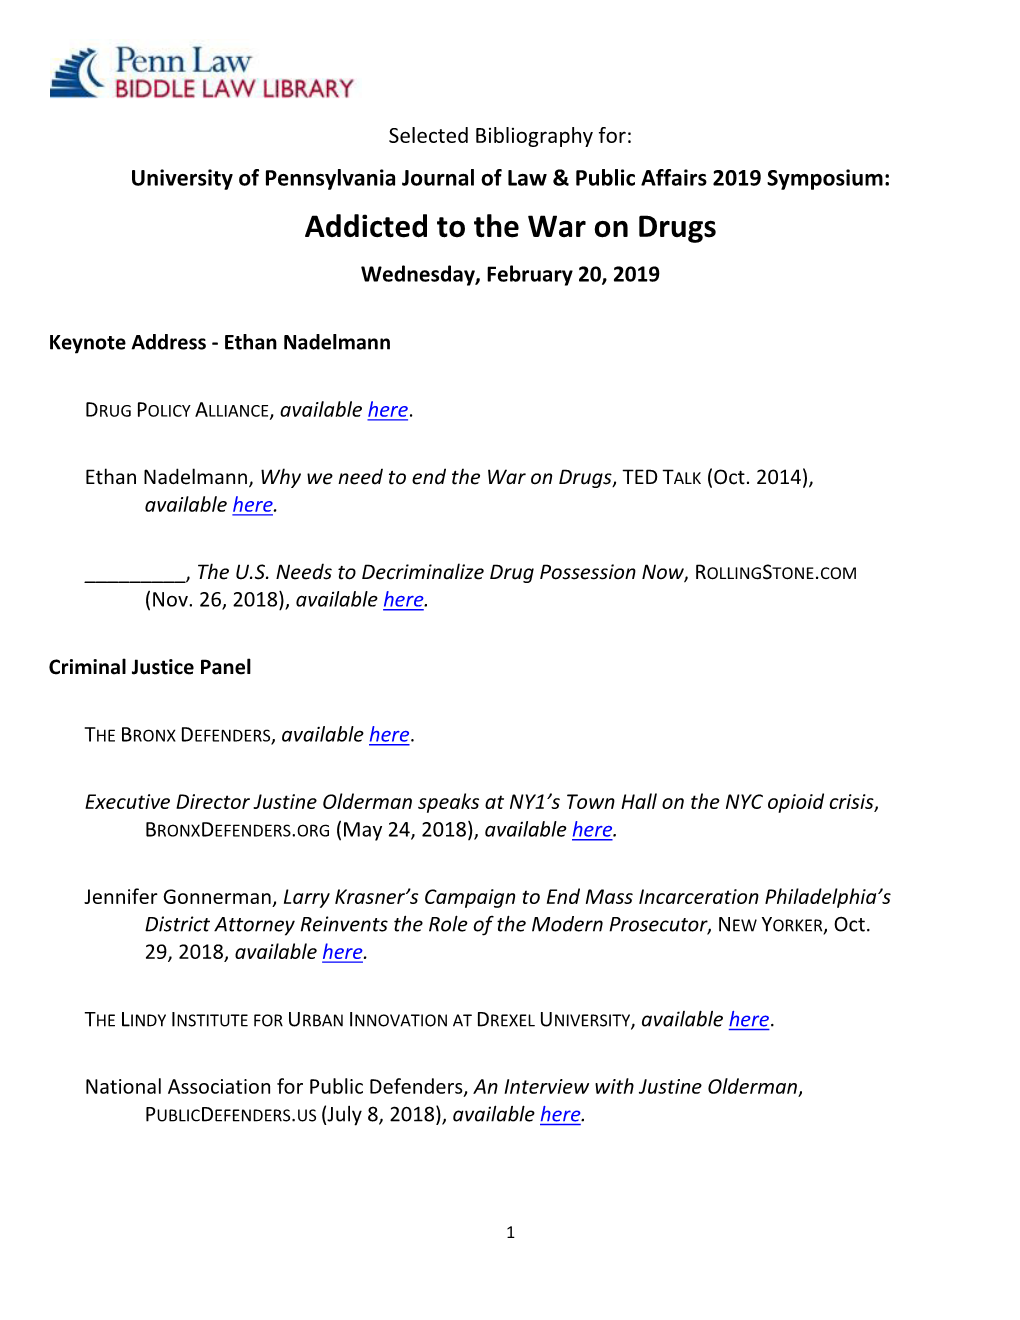 Journal of Law and Public Affairs Symposium: "Addicted to the War